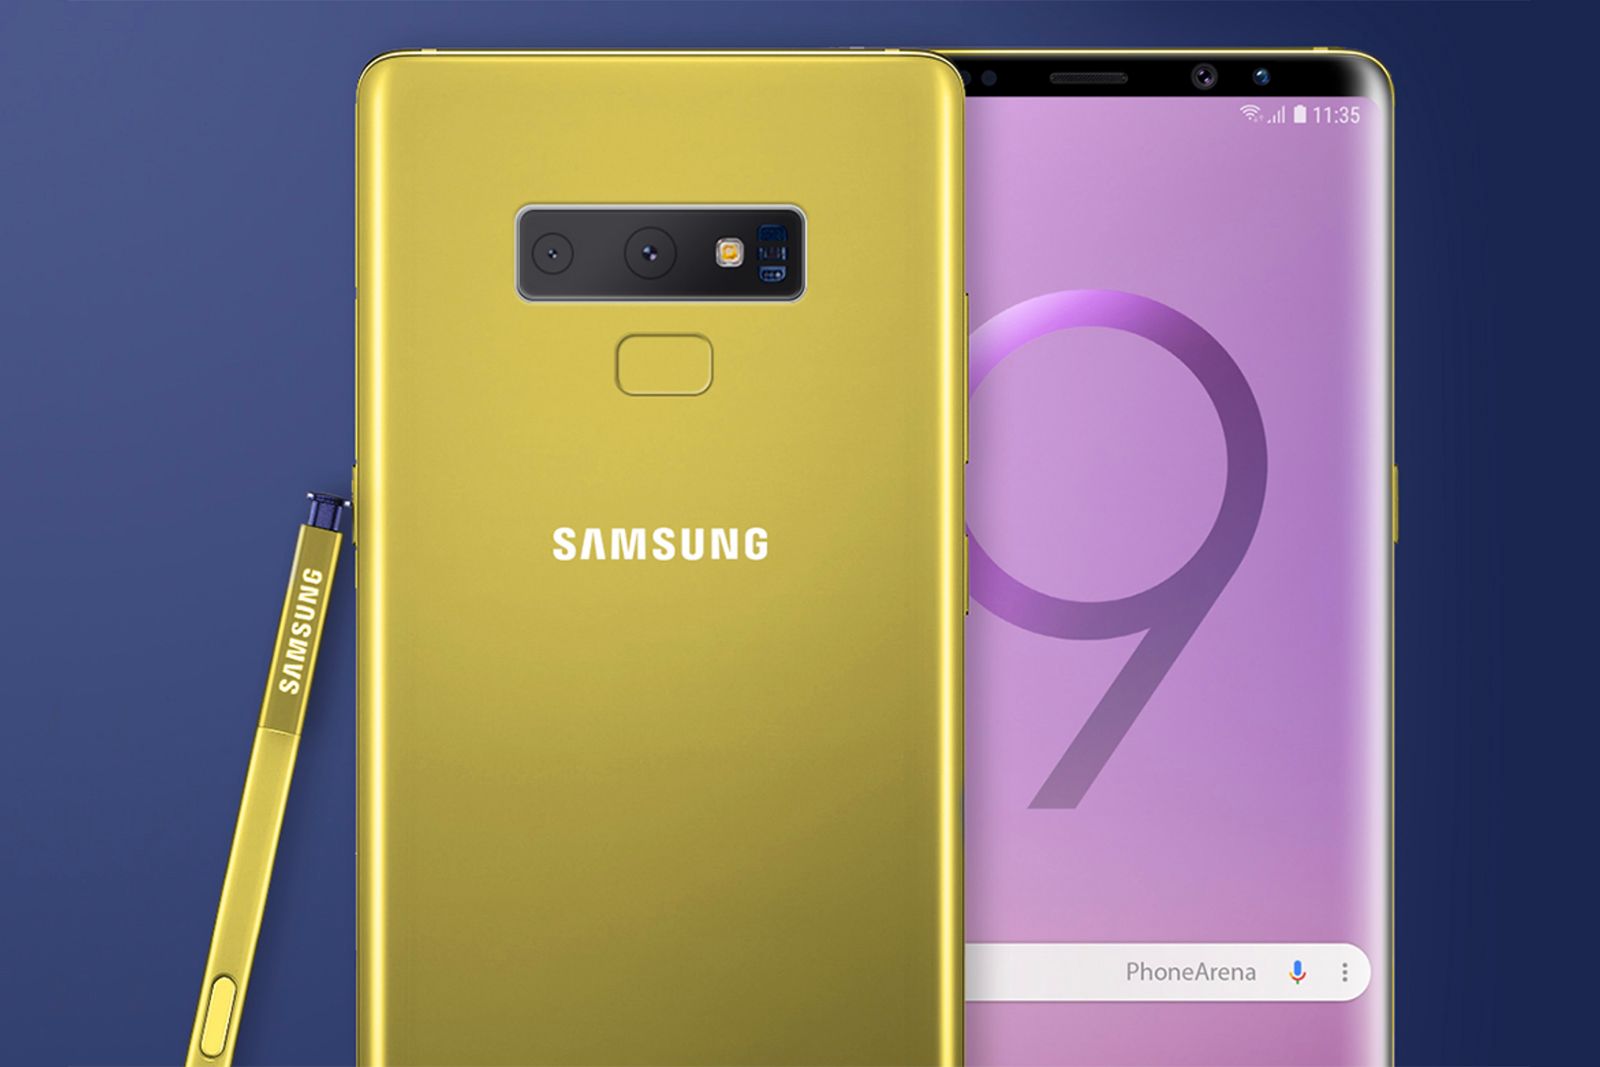 Someone Already Unboxed The Galaxy Note 9 image 1